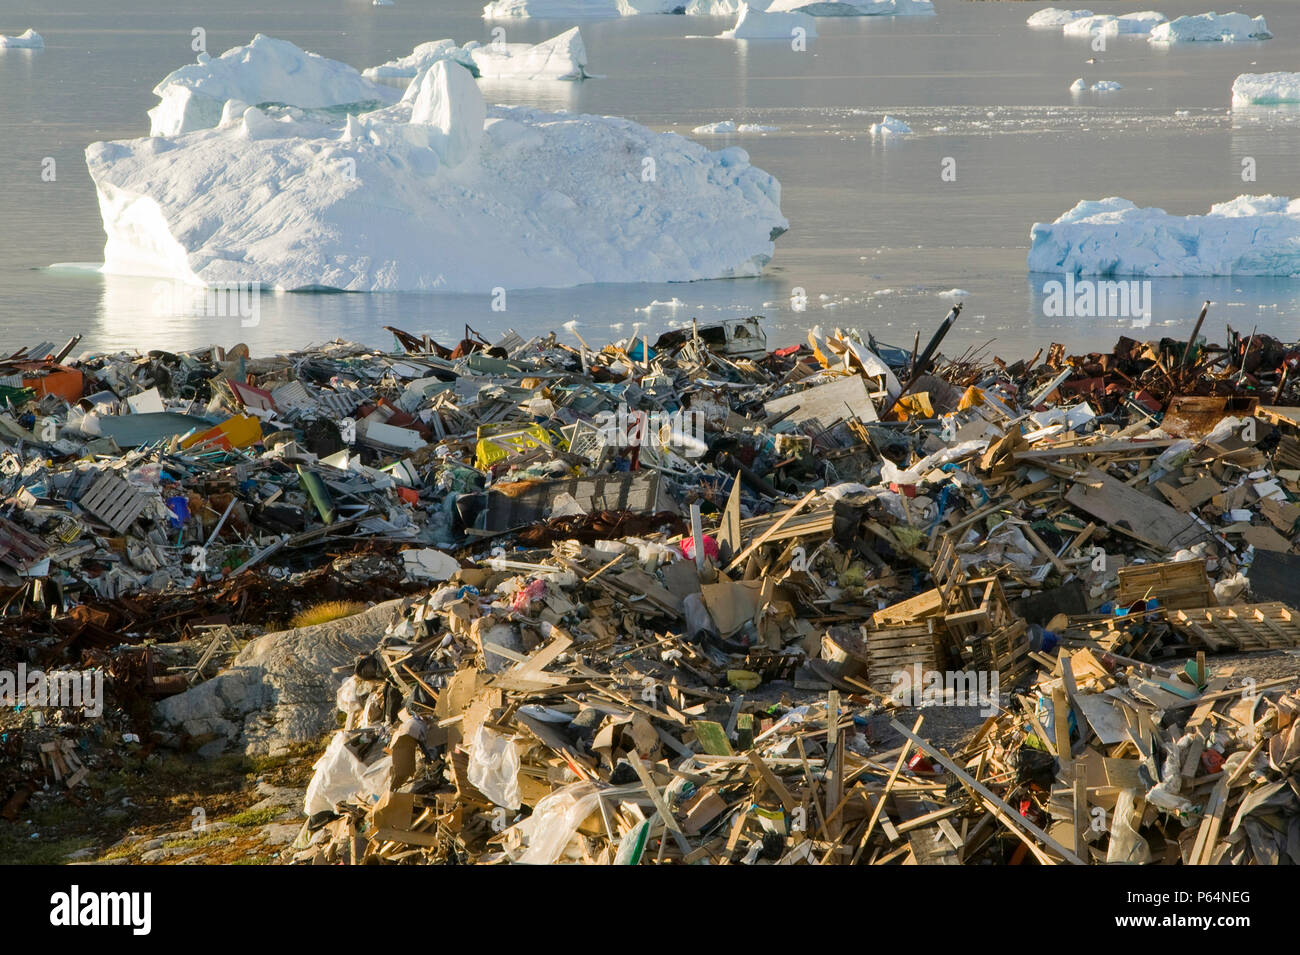 Rubbish dumped on the tundra outside Illulissat in Greenland with icebergs behind from the Sermeq Kujullaq or Illulissat Ice fjord. The Illulissat ice Stock Photo